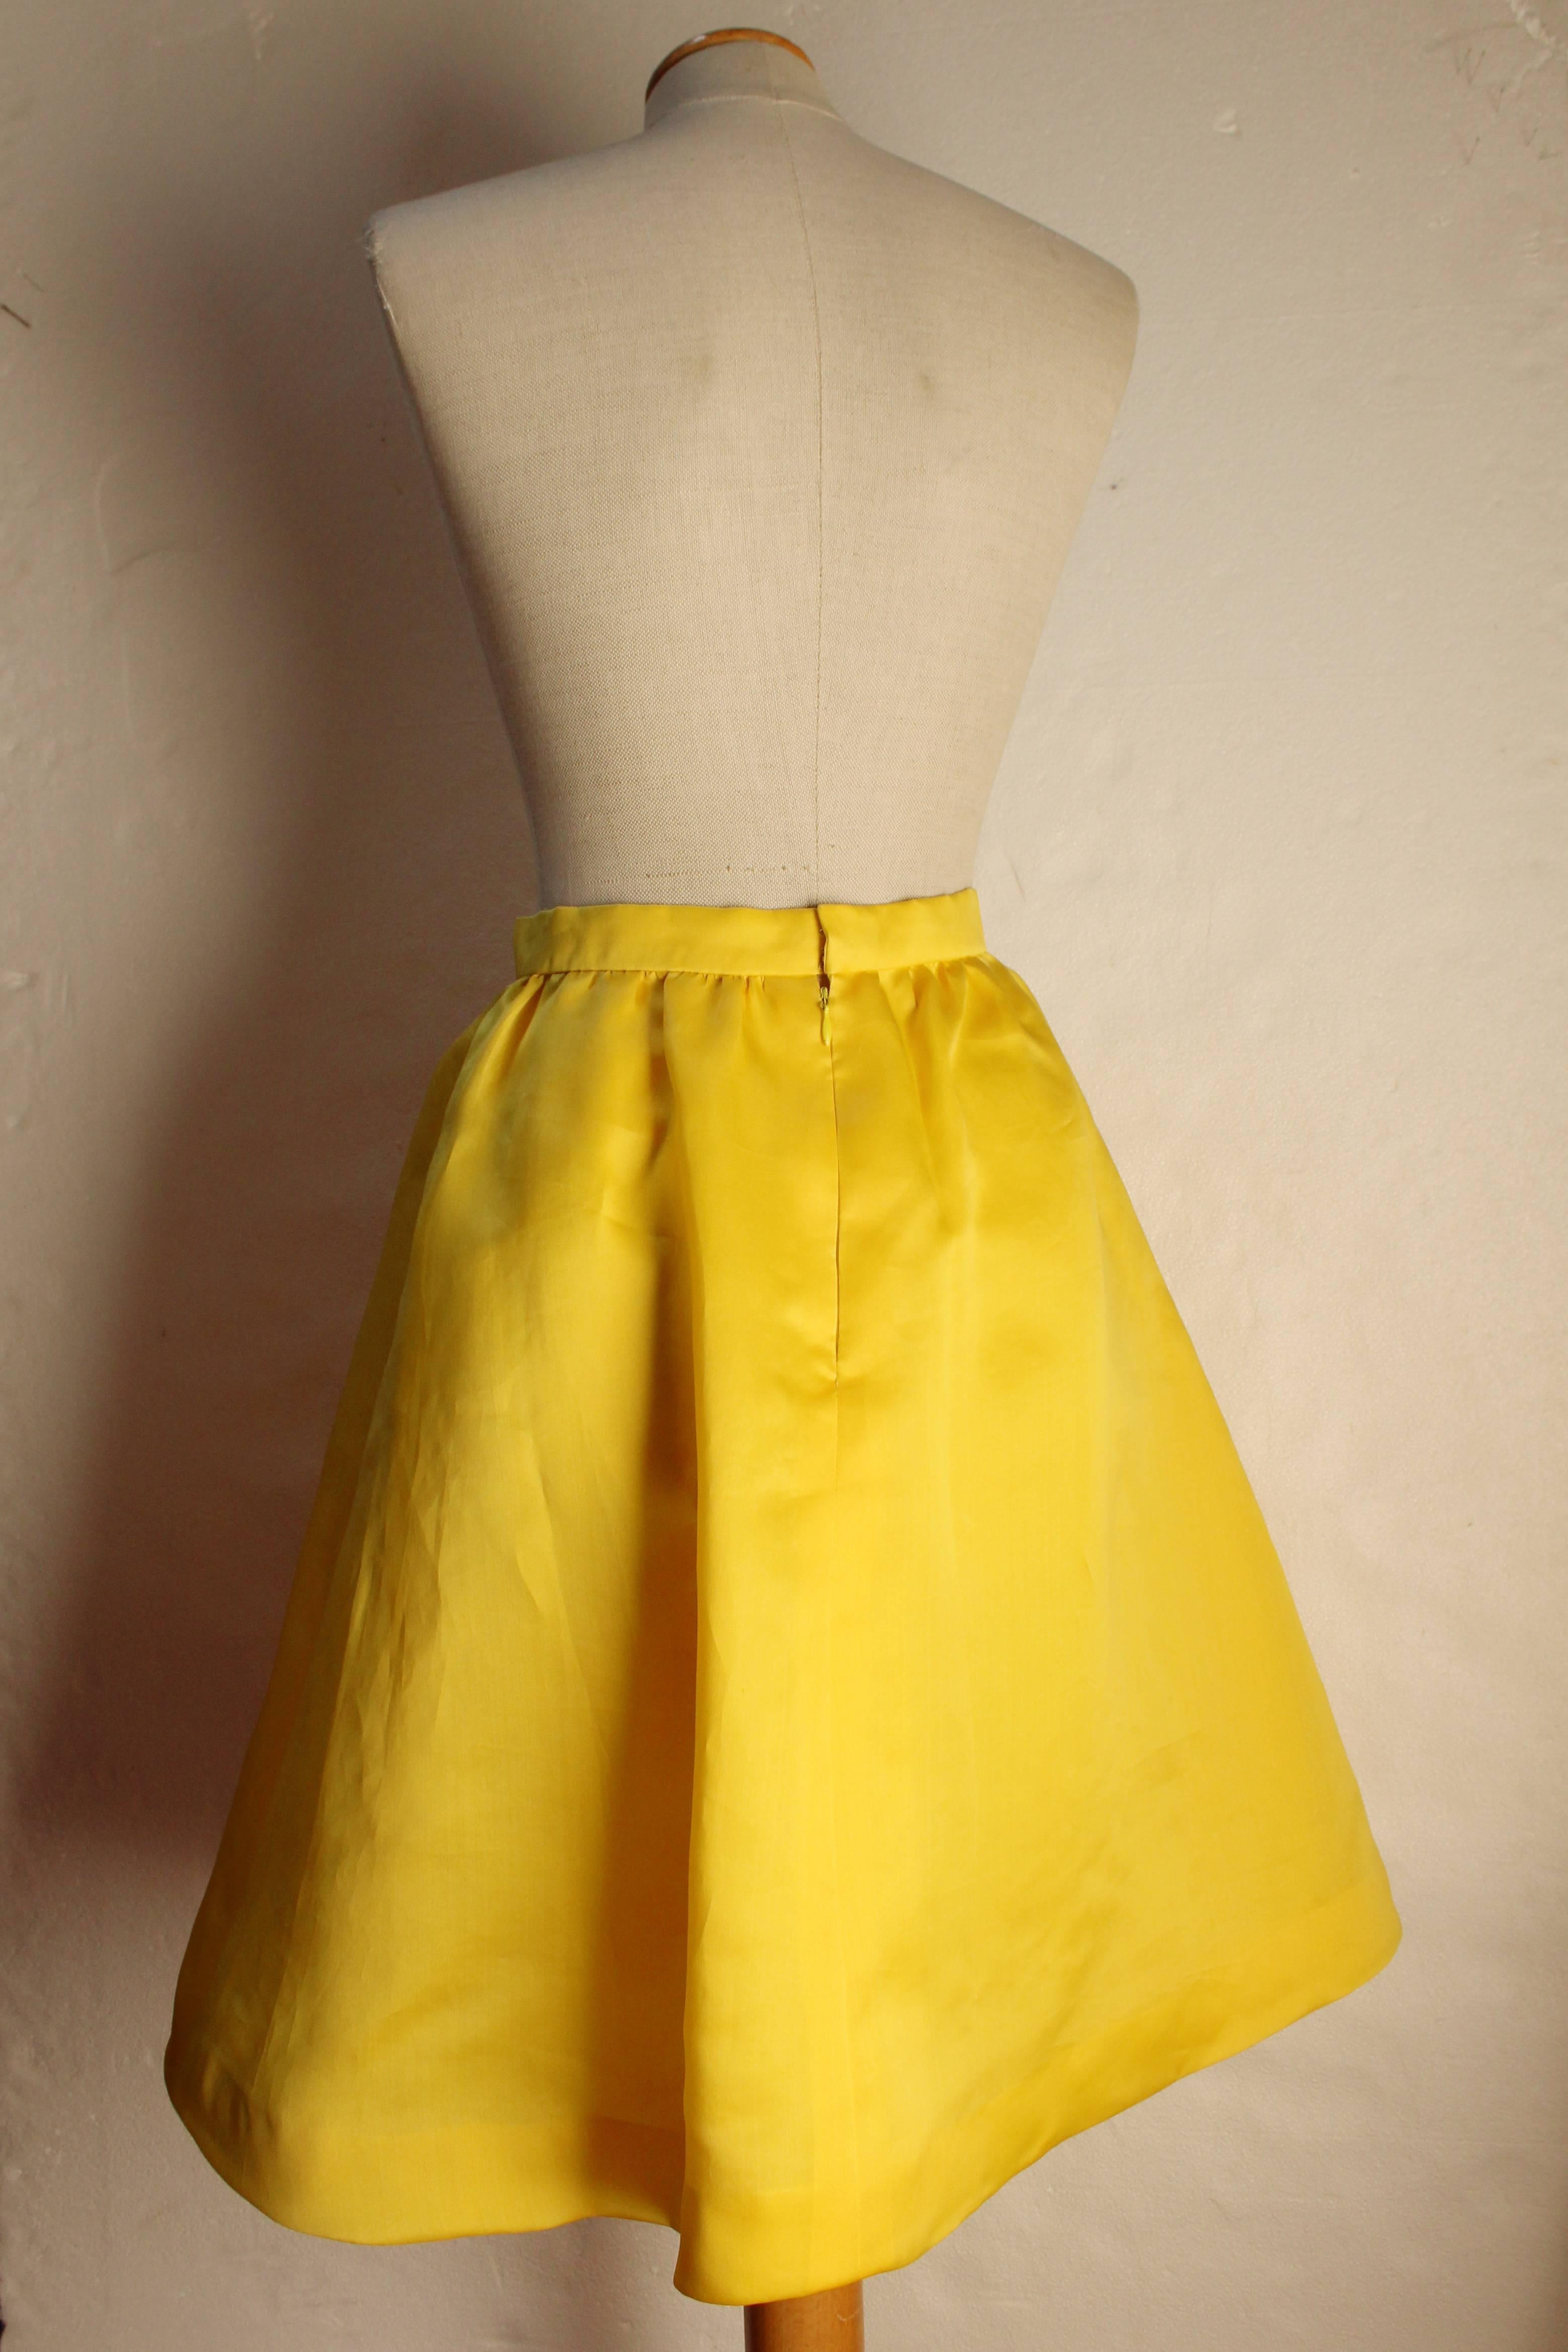 Mid-Length Balenciaga Le Dix yellow skirt, 100% silk. 
The skirt is fully lined in acetate.
This skirt with its 50s flavour dates back to the 1980s.
Size 42 FR.